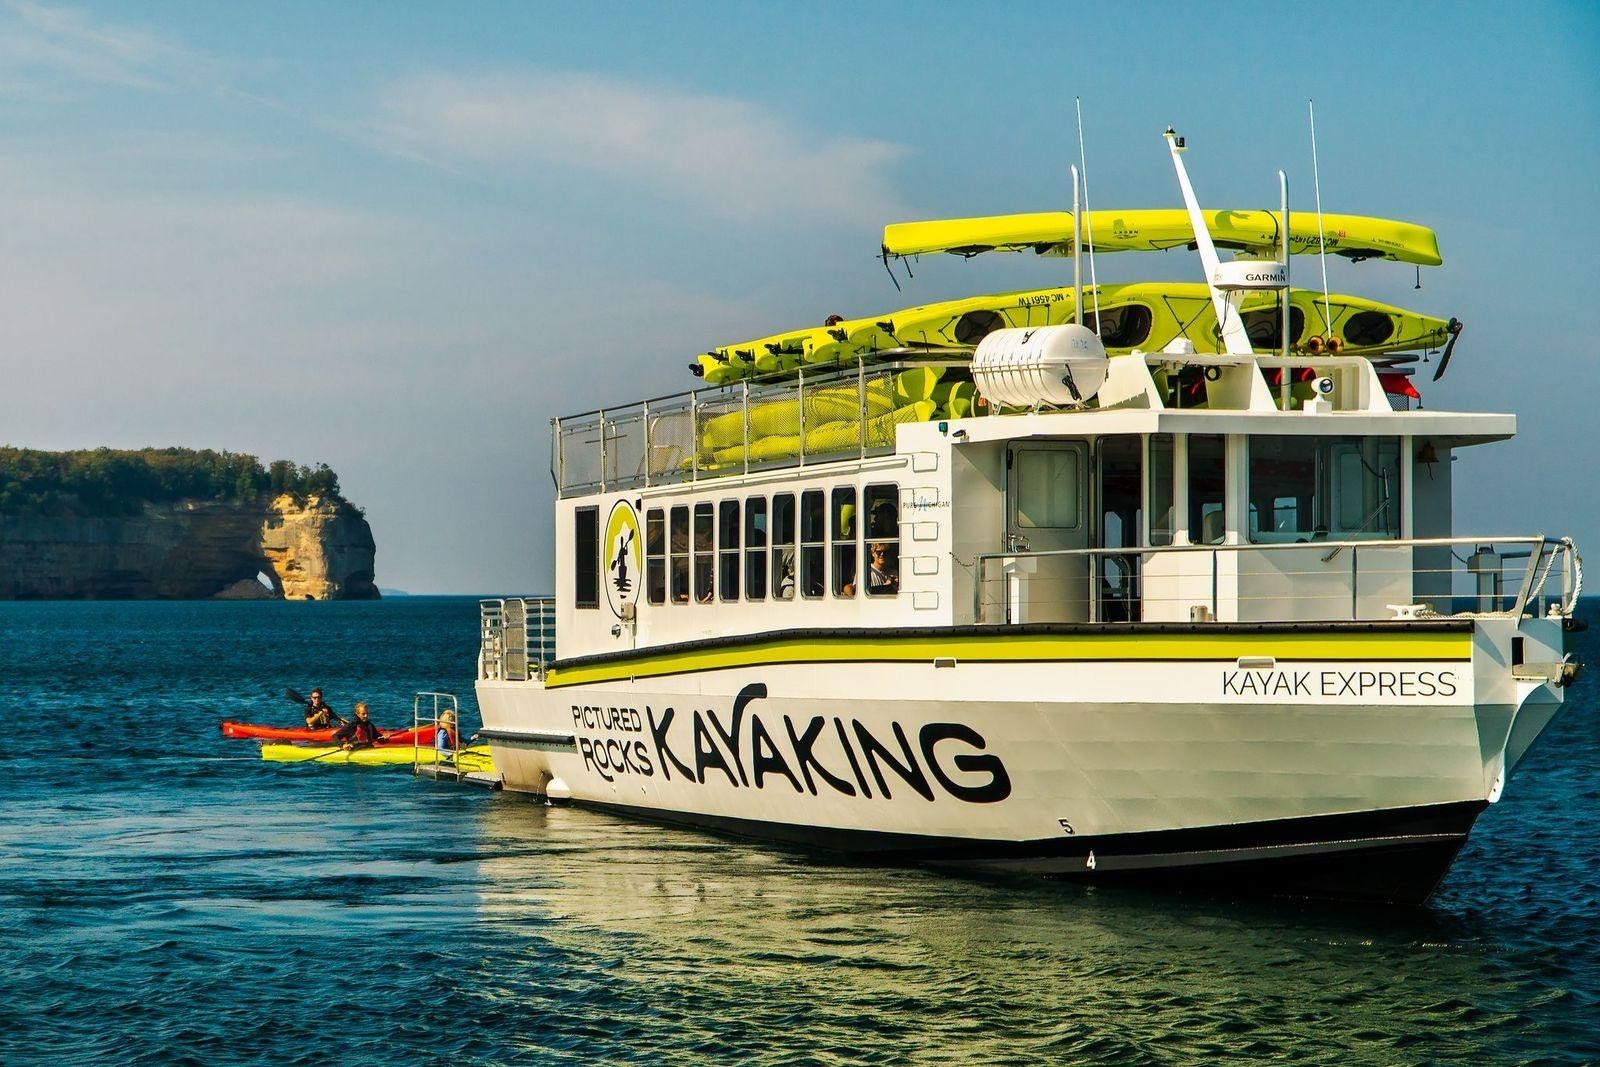 The Kayak Express, which Pictured Rocks Kayaking acquired in 2019, was made specifically for launching kayaks into the water.